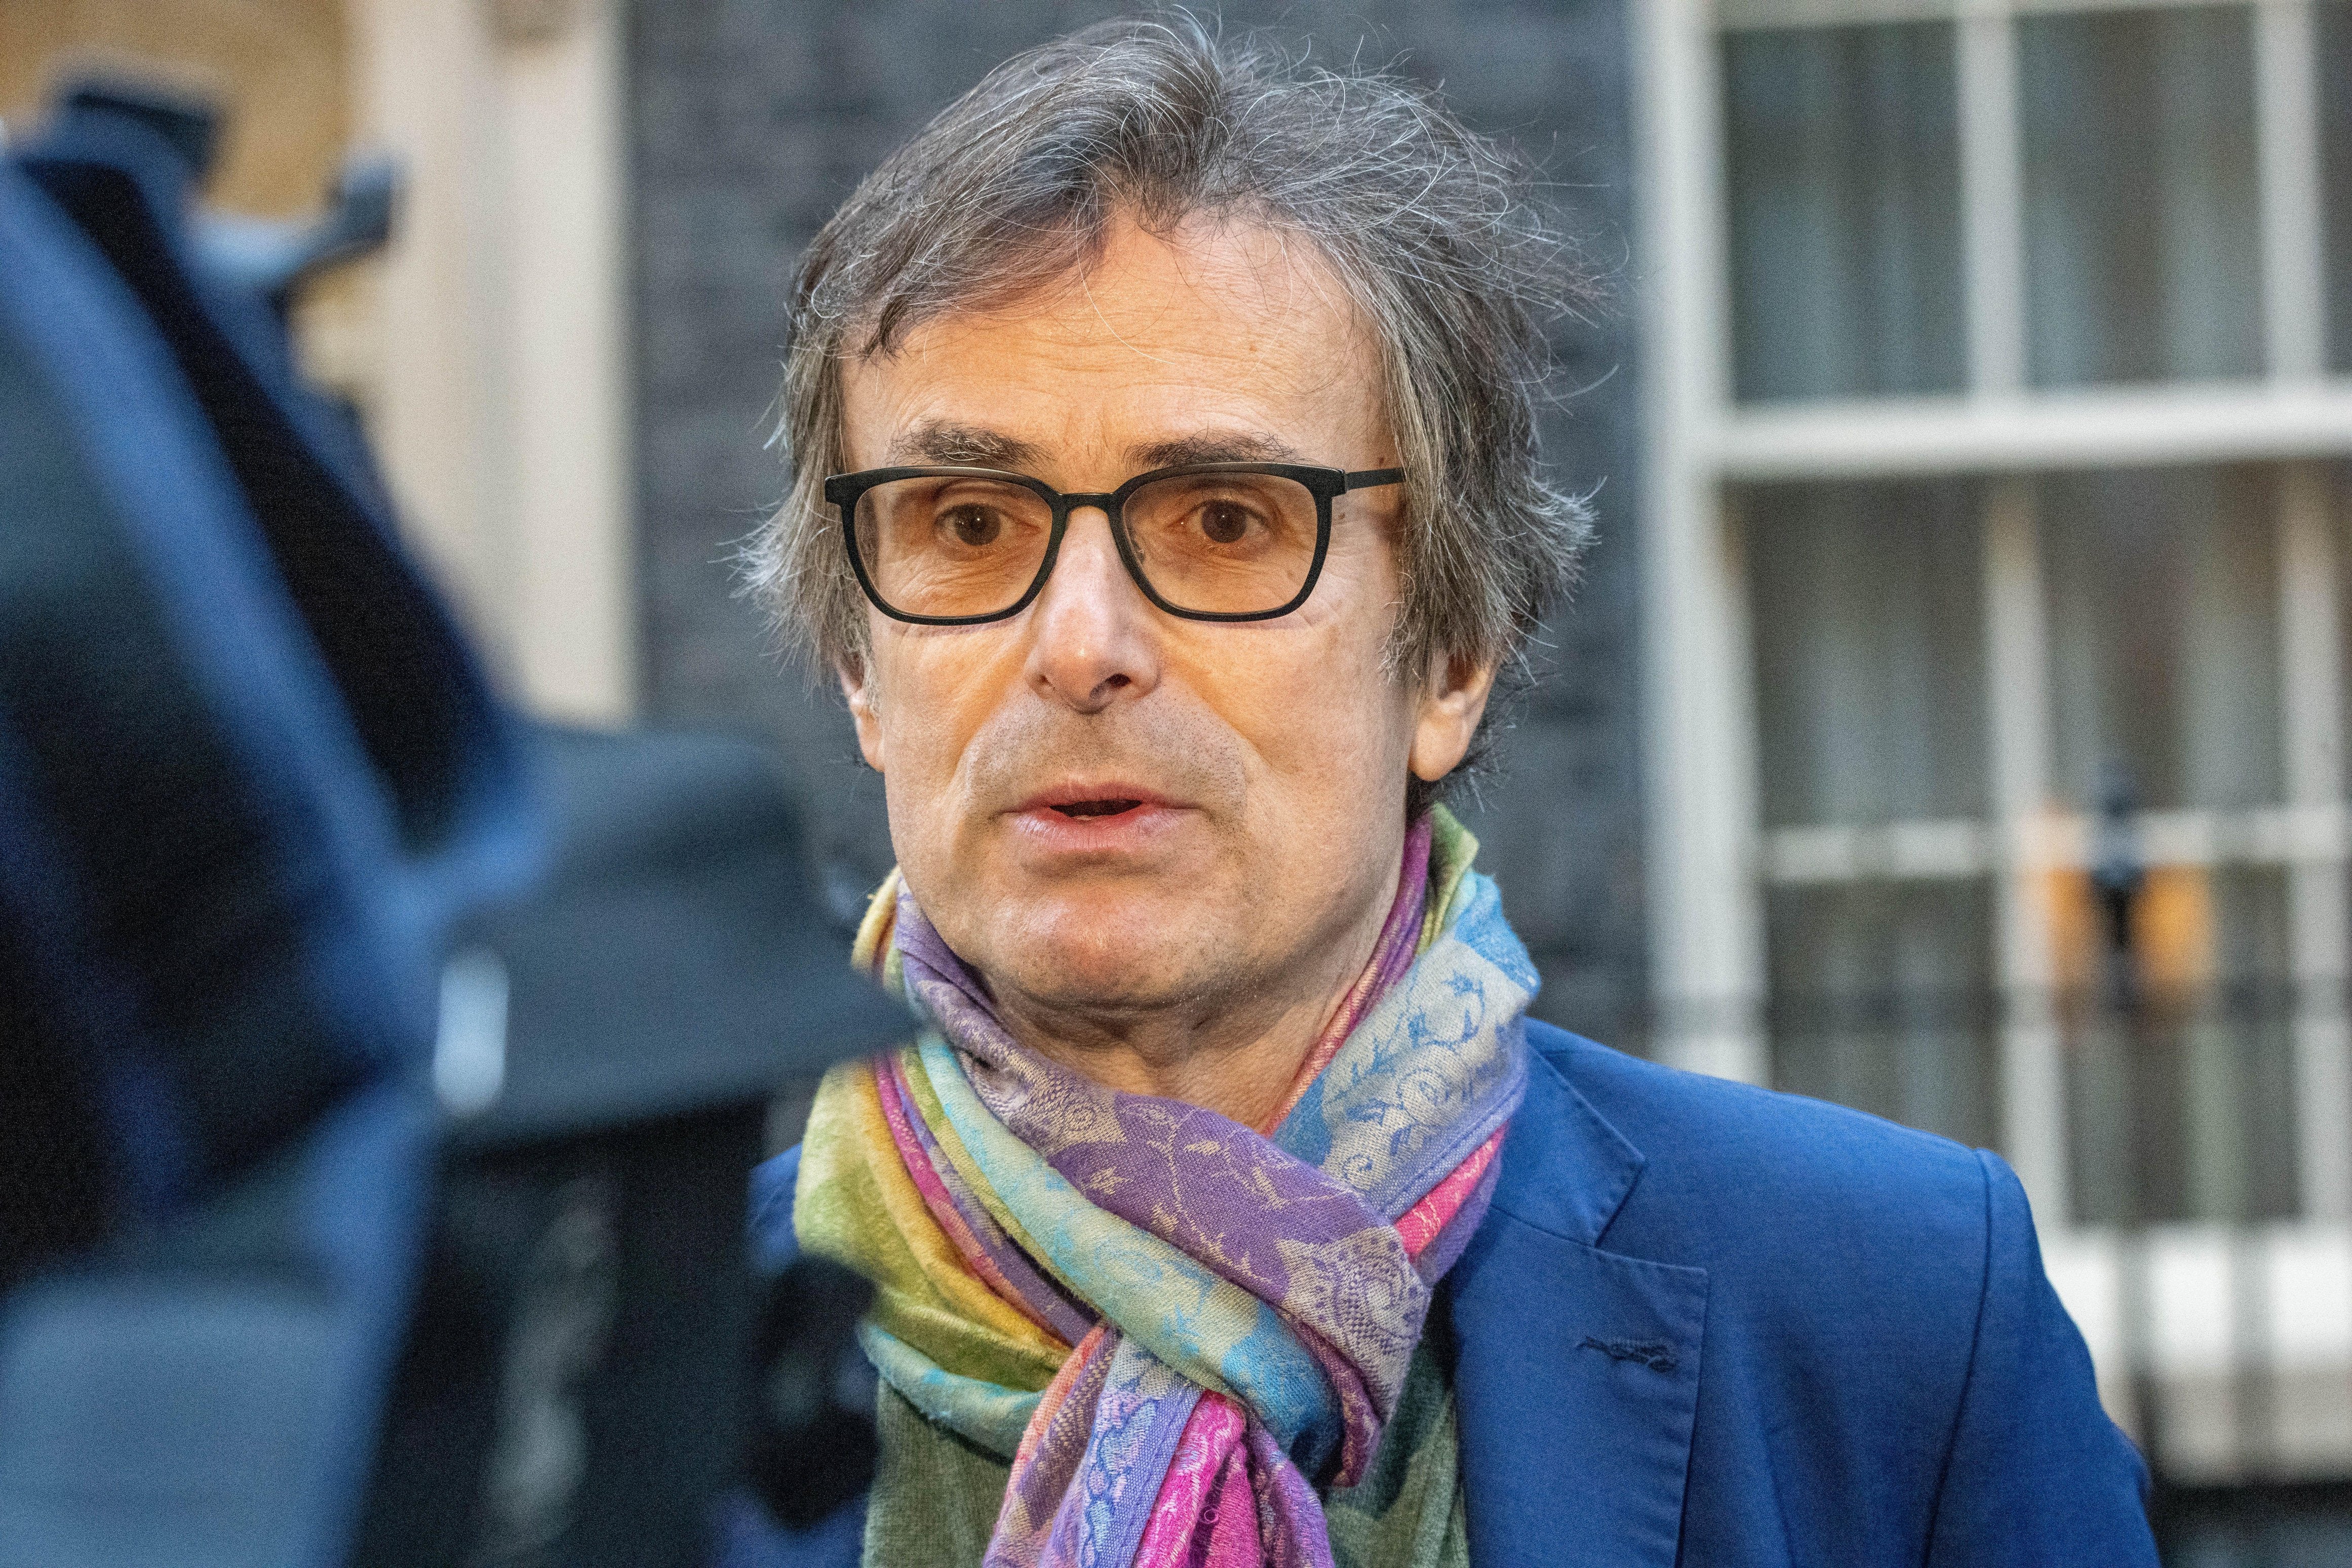 Peston reports on the dramatic cabinet reshuffle in vibrantly coloured neckwear